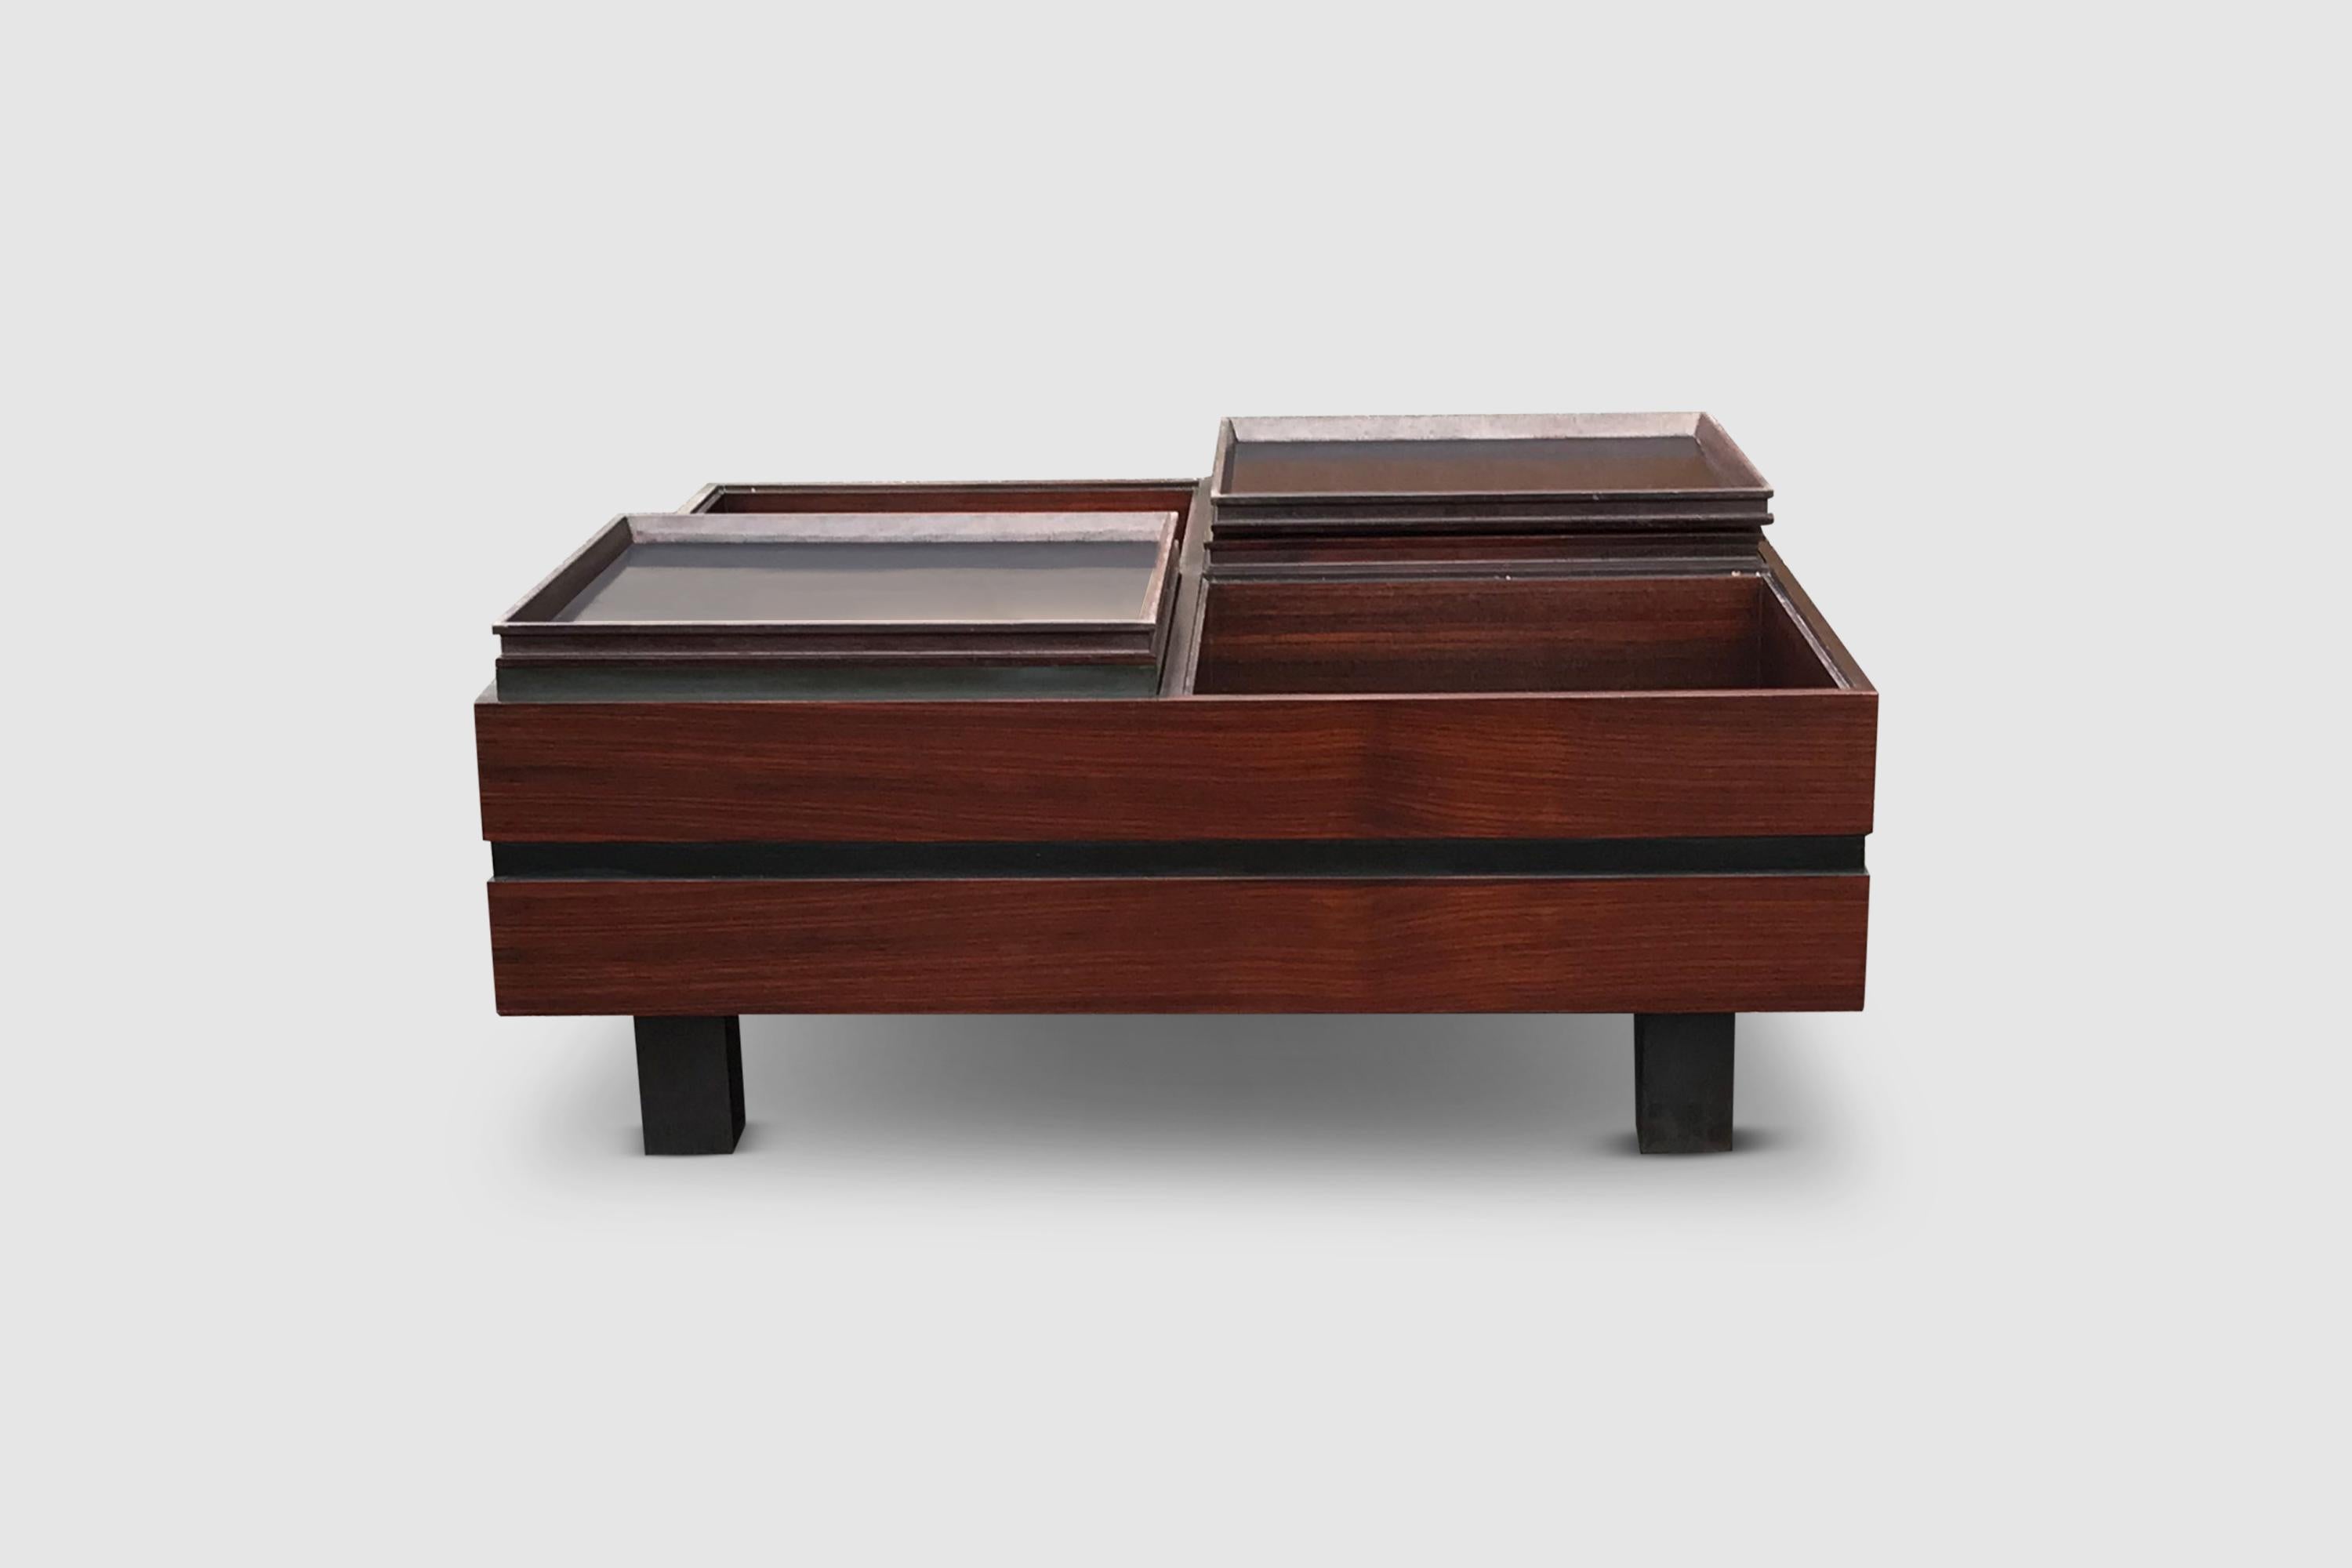 Compartmented Teak Coffee Table by Carlo Hauner for Forma Italy 1960s For Sale 1